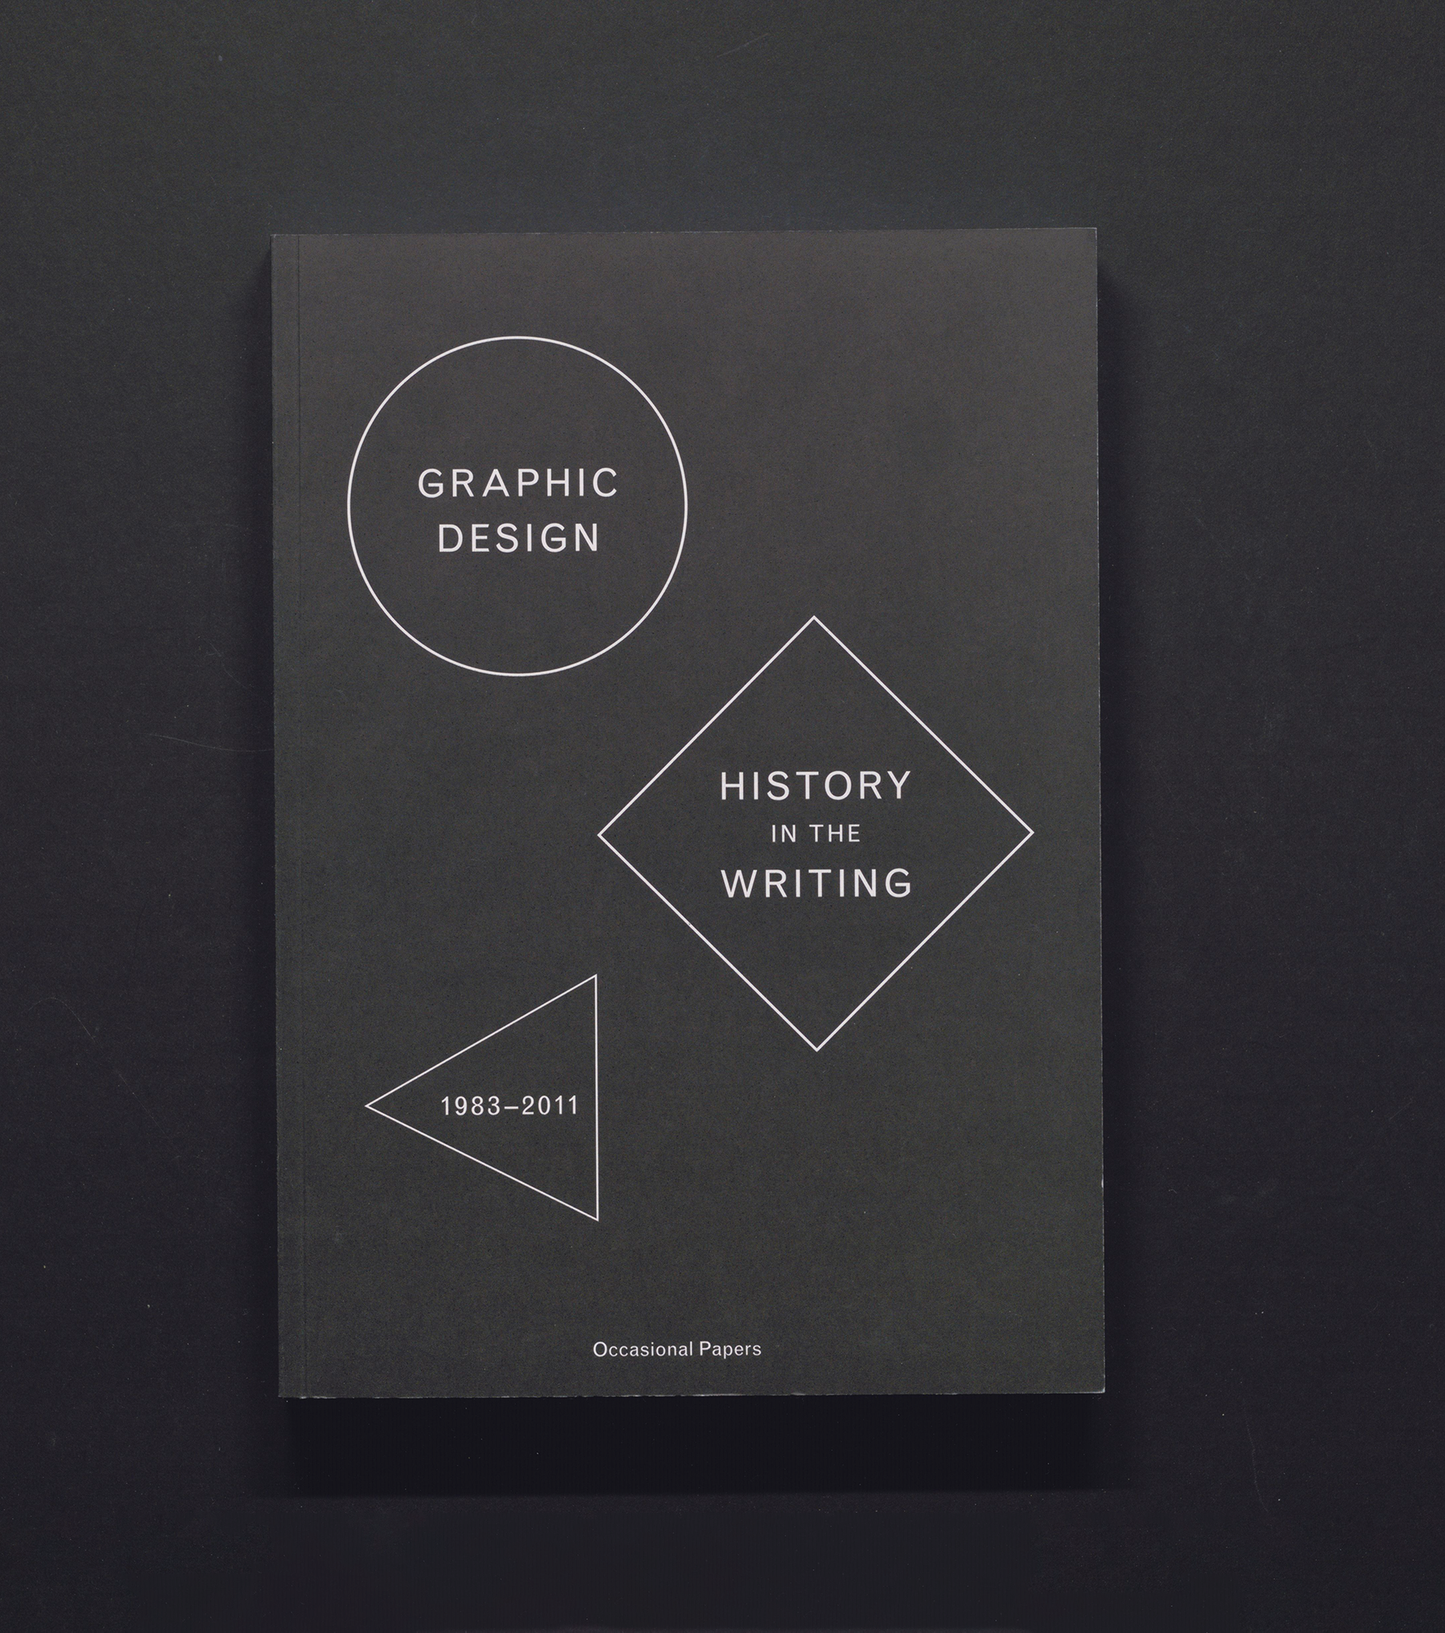 Graphic Design - History in the Writing 1983-2011